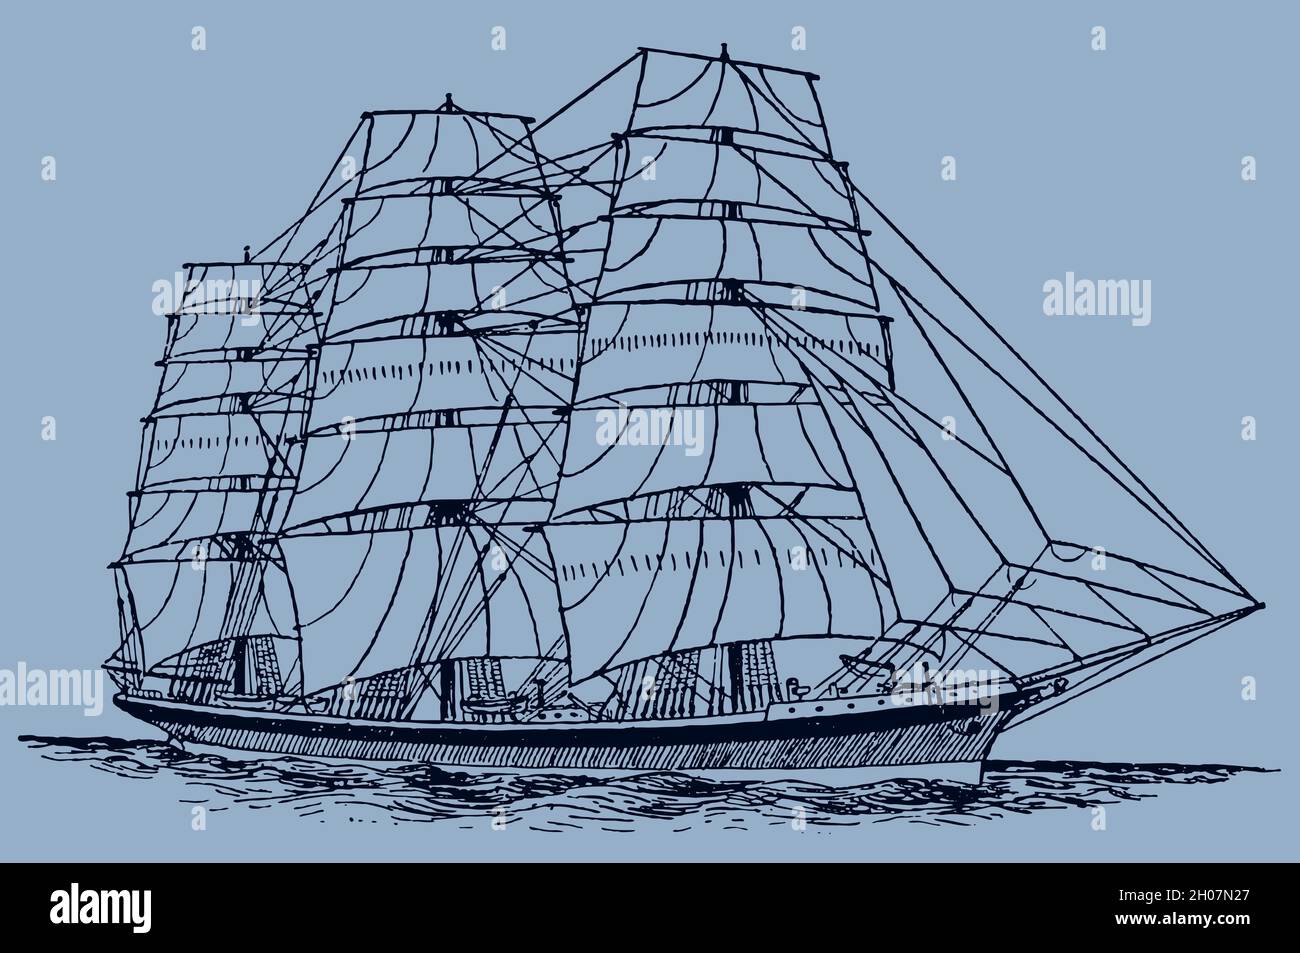 Full-rigged sailing ship on sea, on light blue background Stock Vector